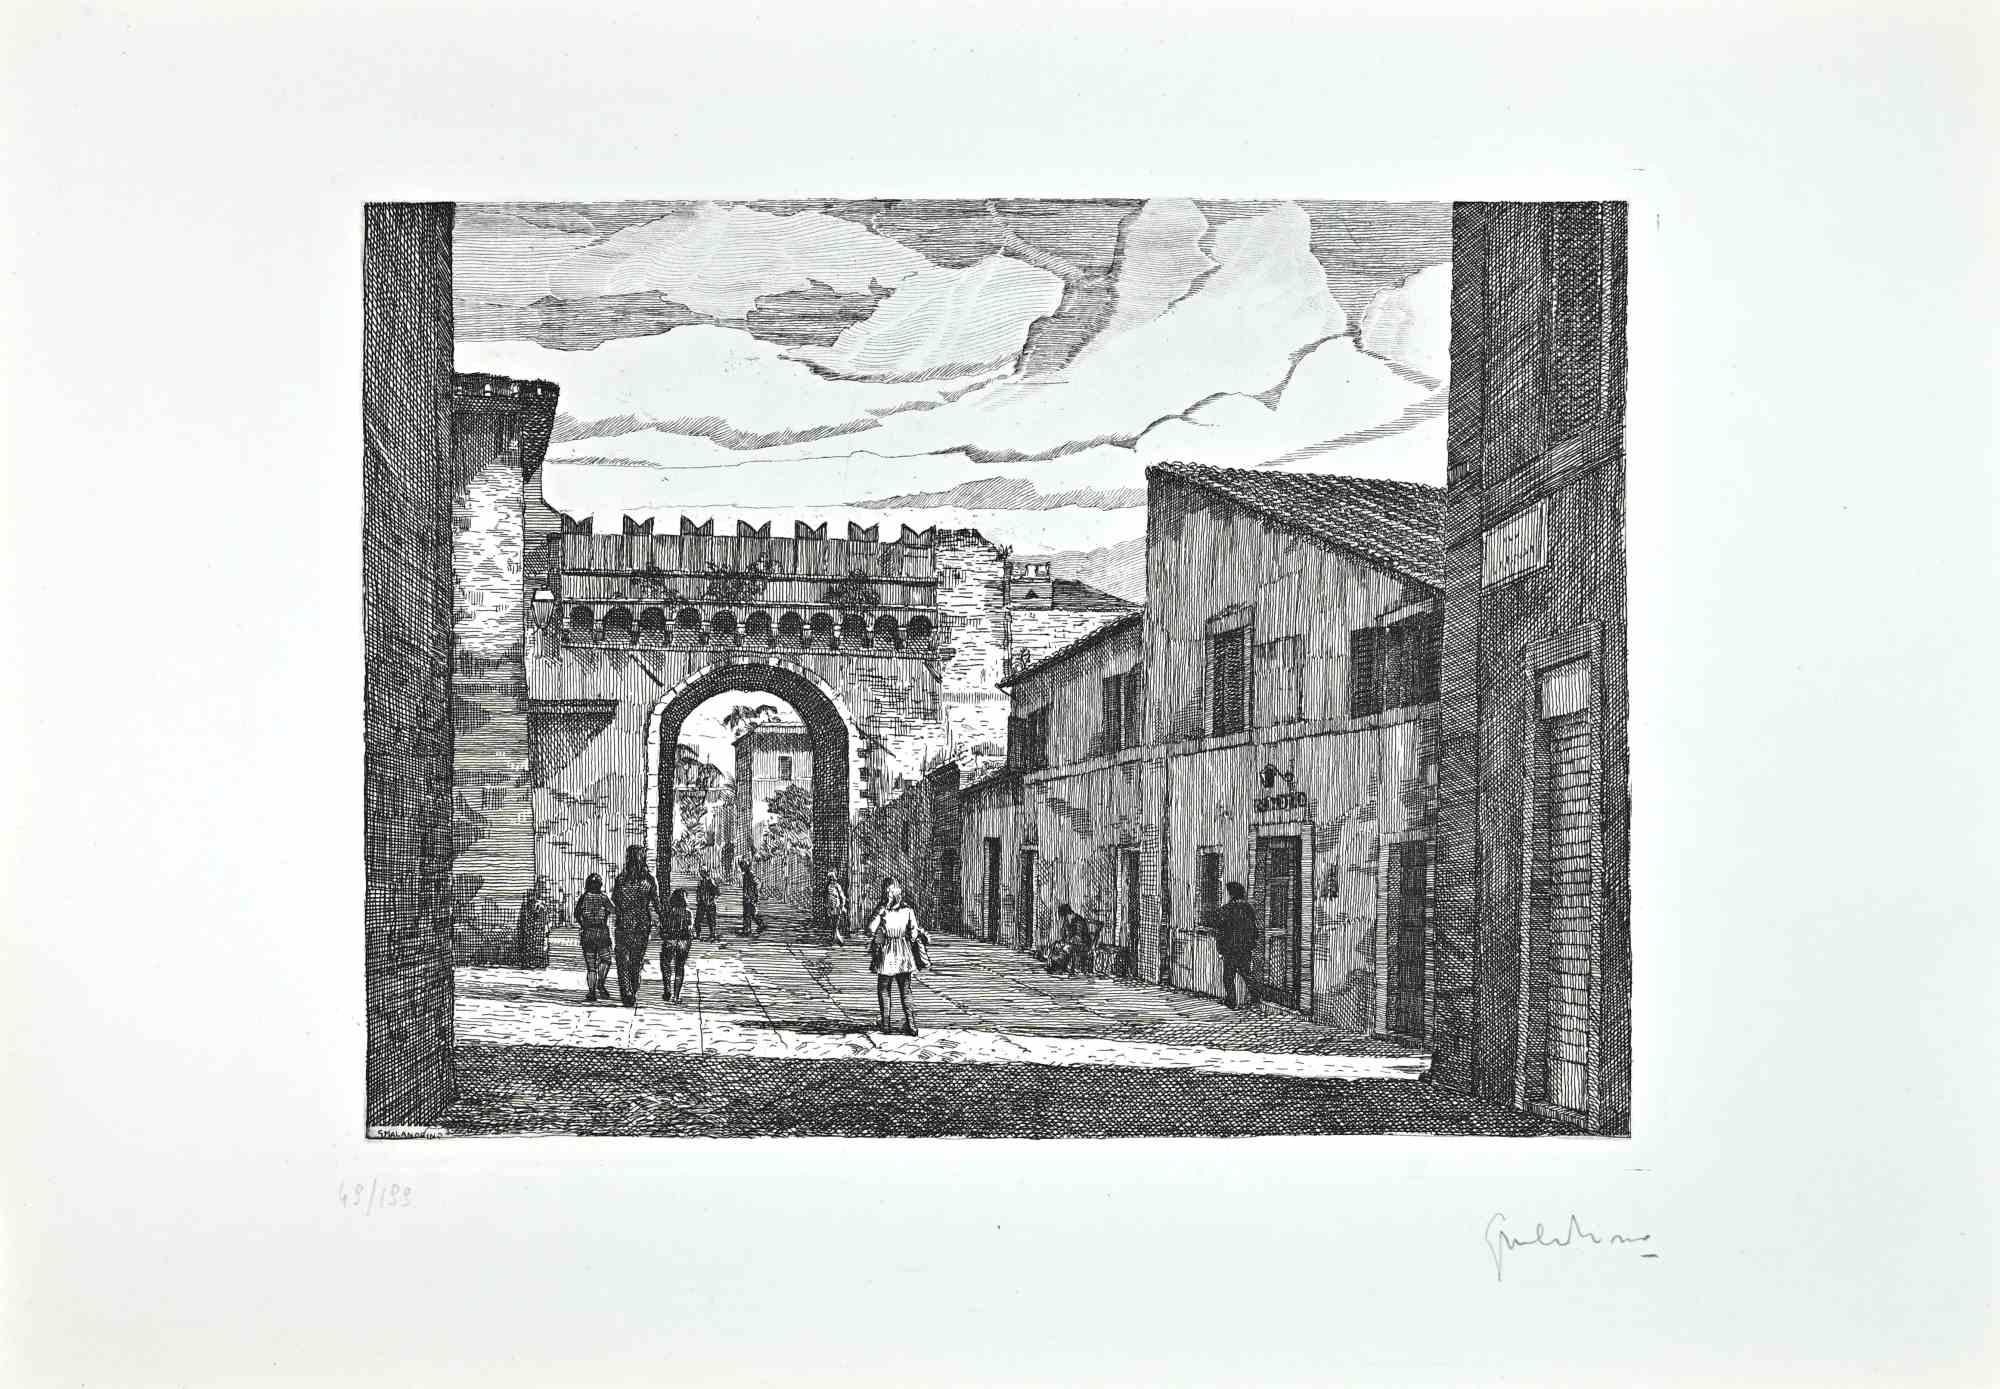 Roman View is an artwork realized by Giuseppe Malandrino.

Print in etching technique and hand watercolored.

Hand-signed by the artist in pencil on the lower right corner.

Numbered edition,49/199.

Good condition.

This artwork represents the